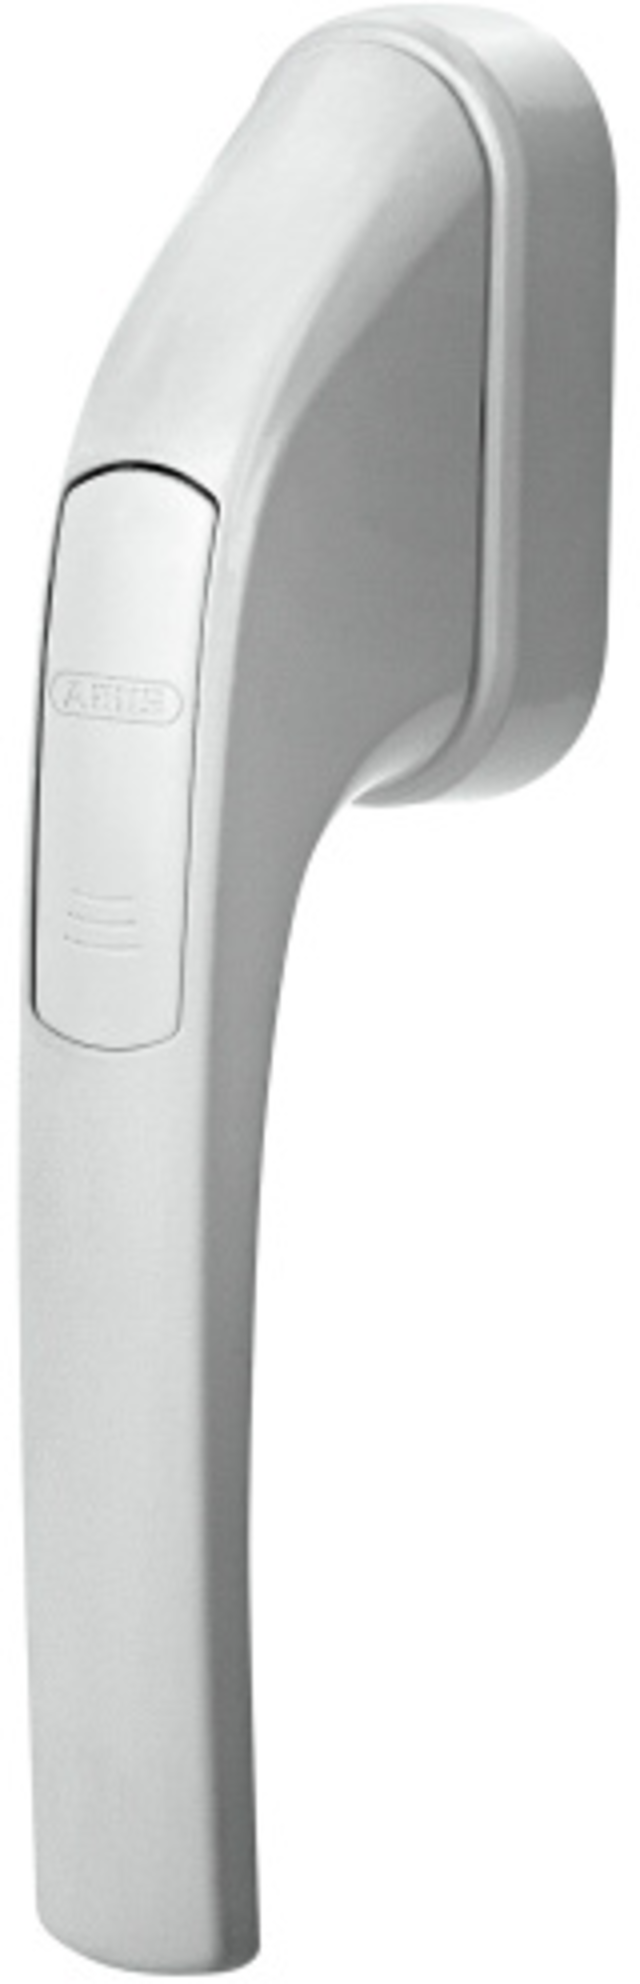 Secvest 2WAY FG 350 E wireless window handle, silver front view left